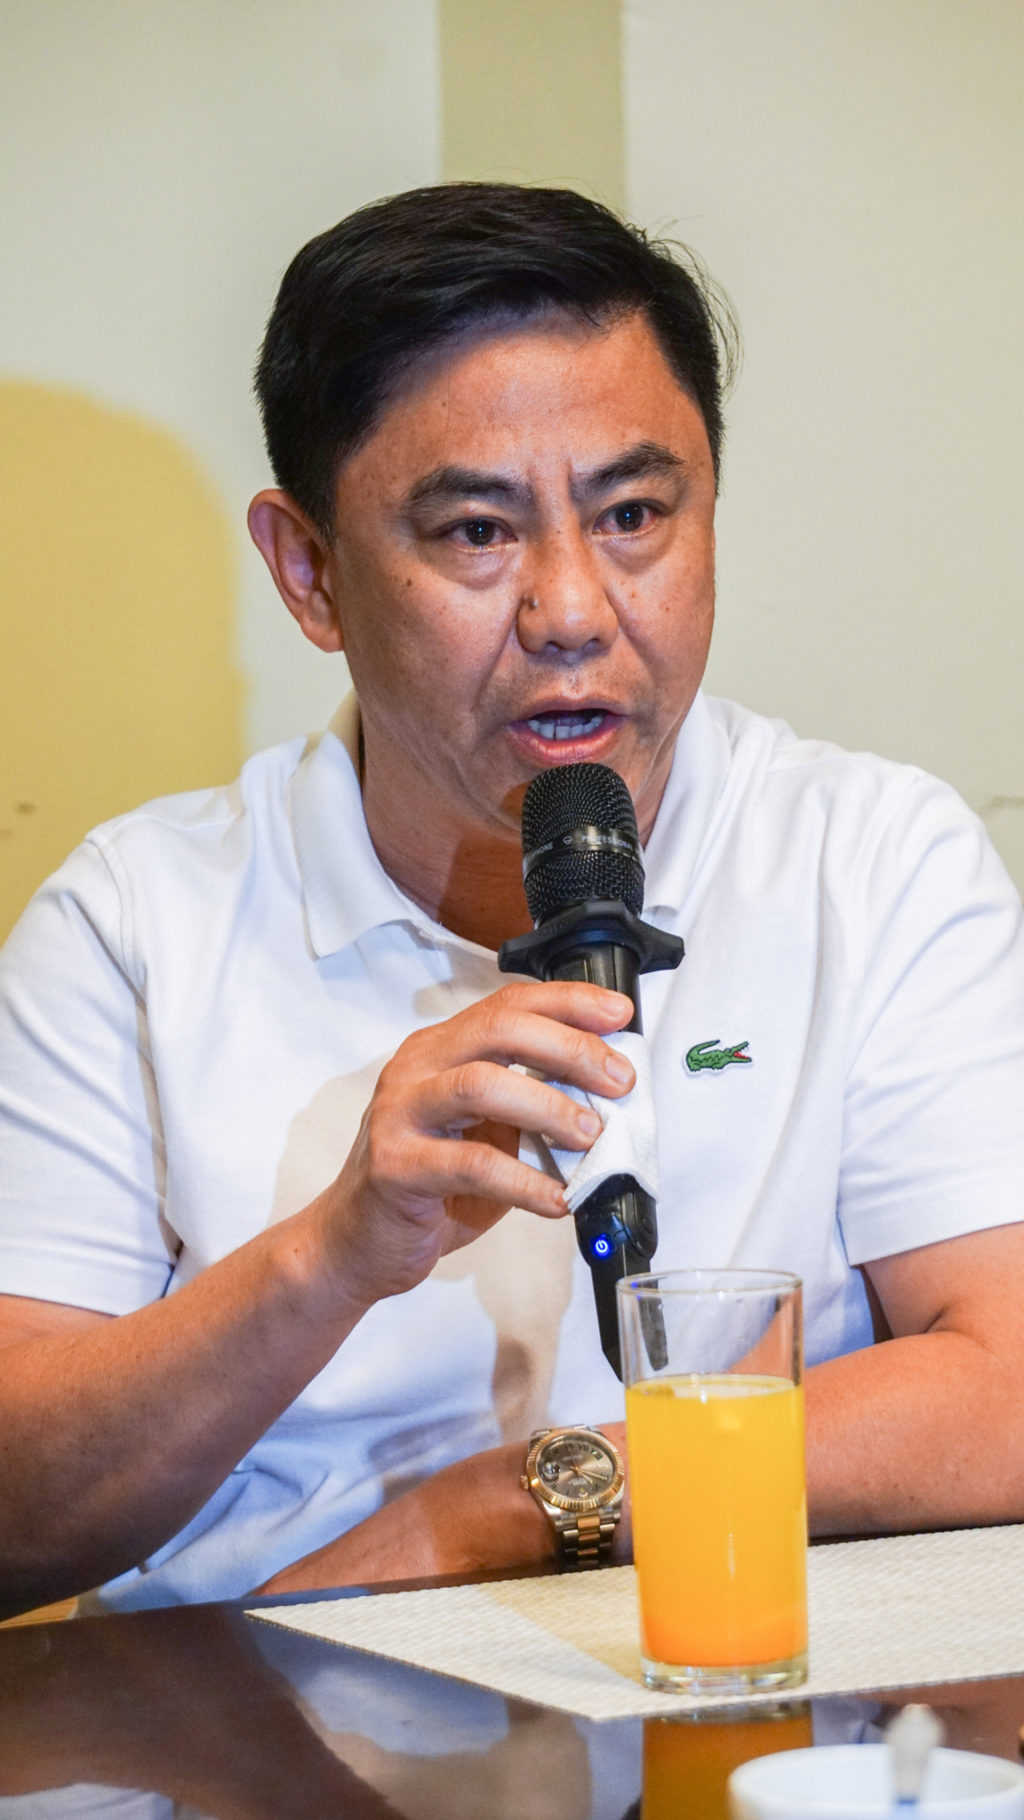 Lapu-Lapu City Mayor Junard Chan is encouraging workers, who are returning to work amid the GCQ, to take the tests for COVID-19 for their safety and everyone's well-being.